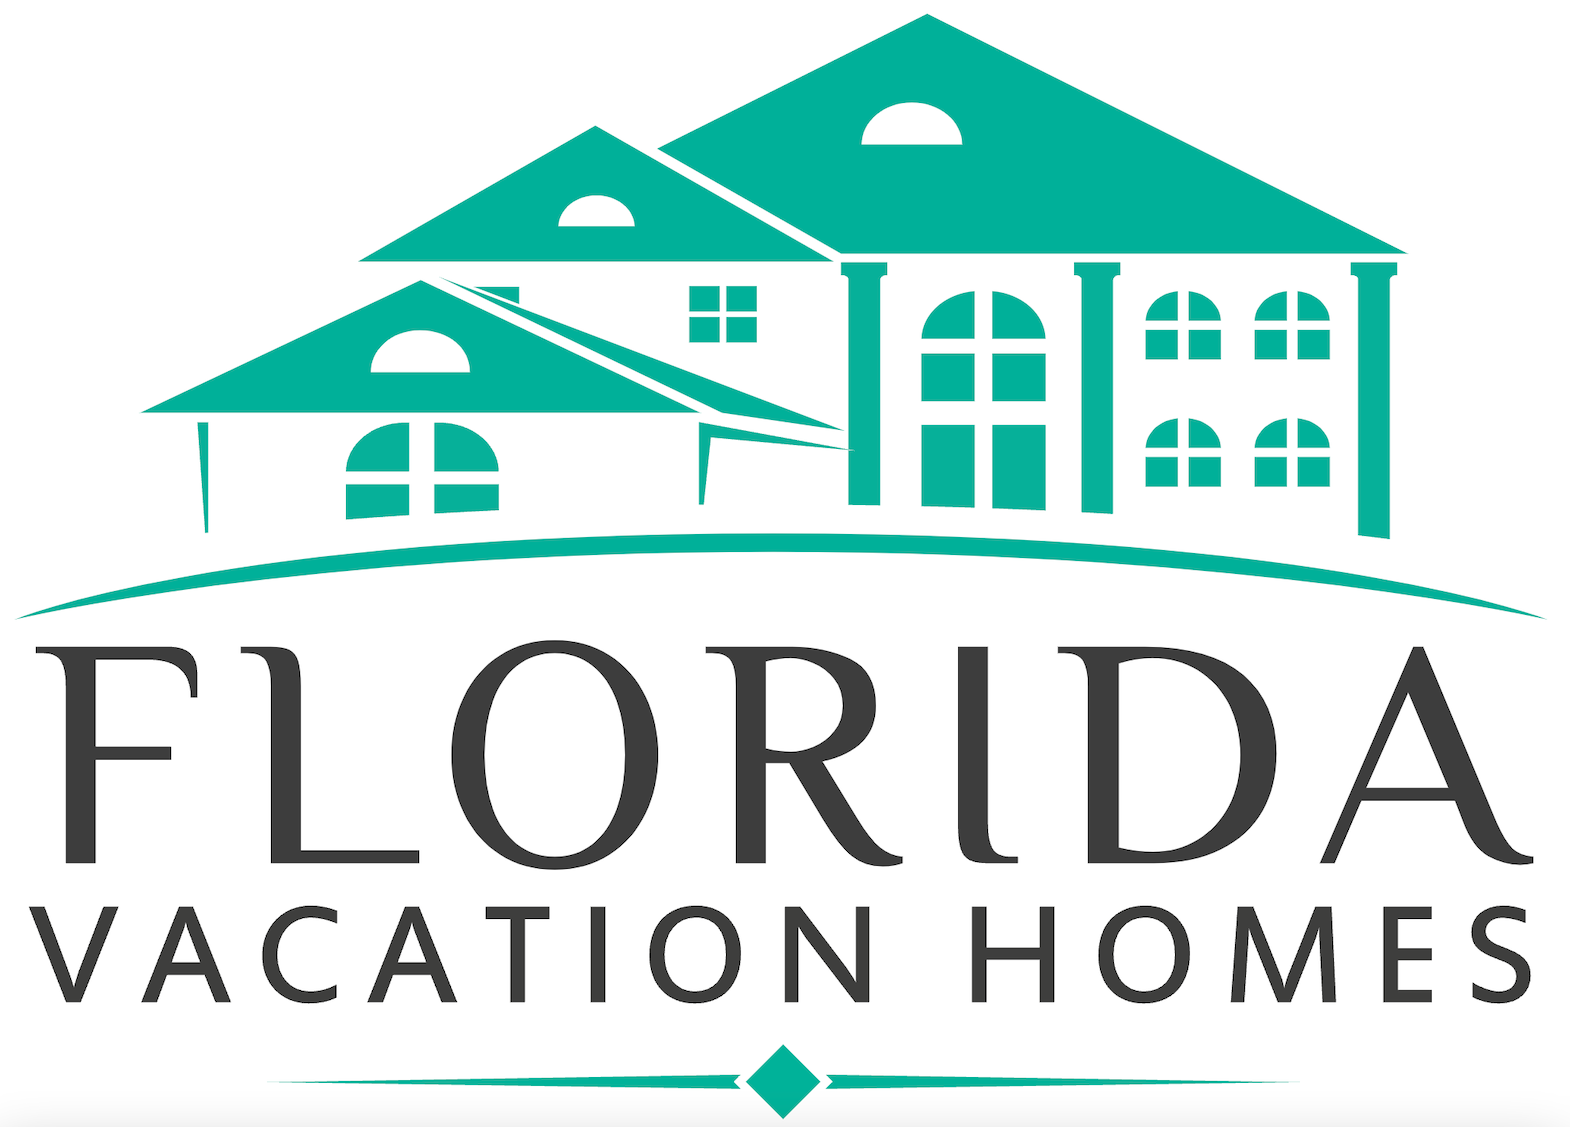 Florida Vacation Homes partnering with THIRDHOME